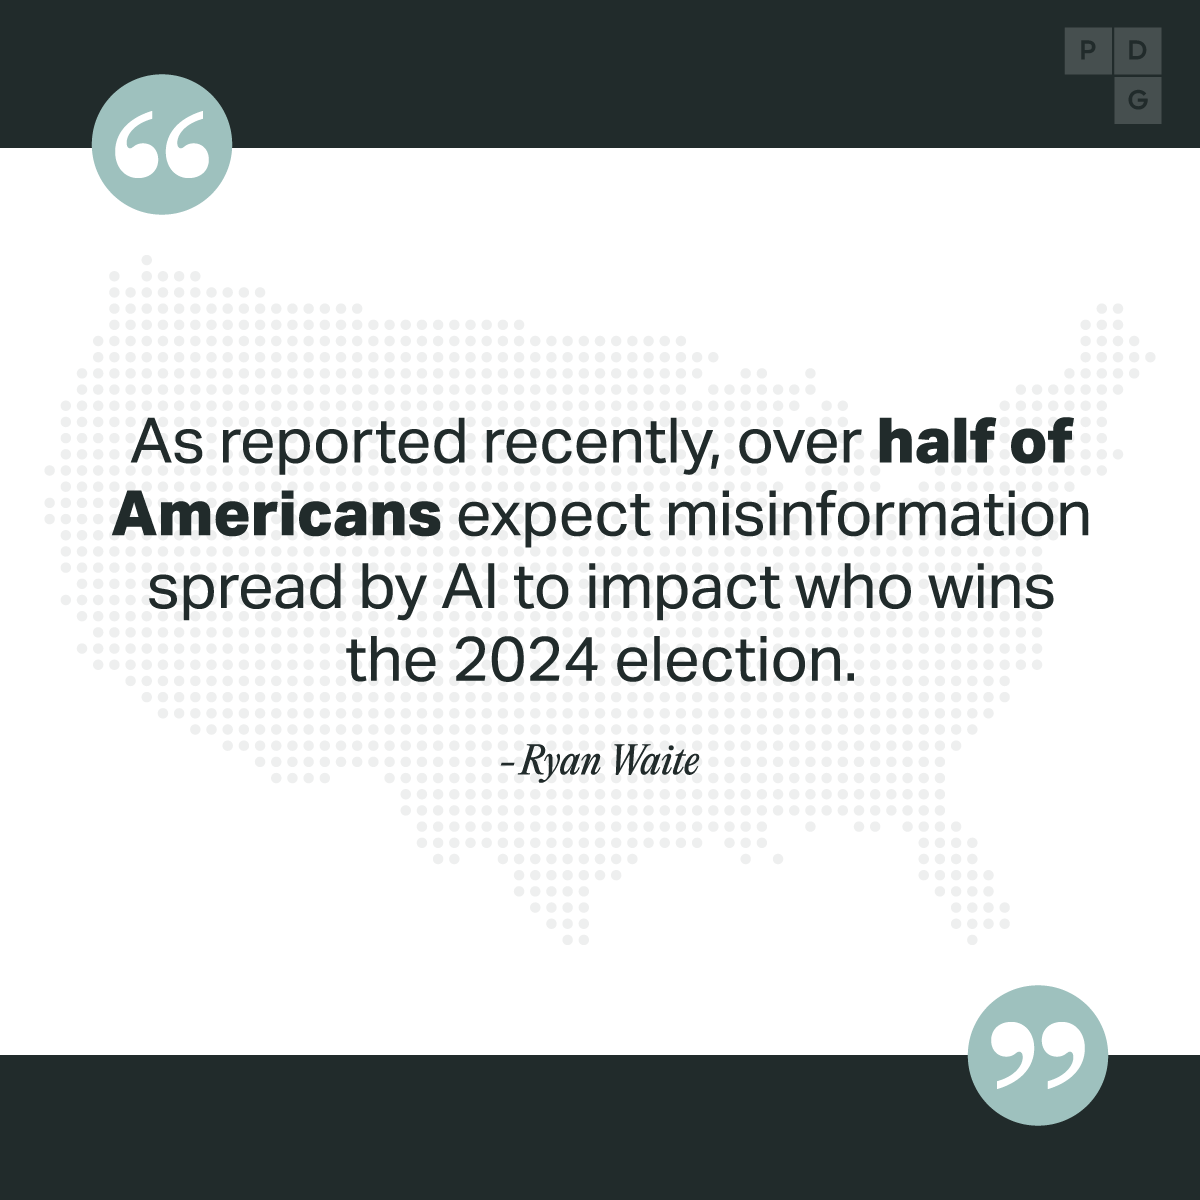 Sneak peek! 🔍 Our upcoming op-ed explores AI's role in politics, addressing issues like misinformation and proposing solutions. Stay tuned for a nuanced take on technology and democracy. #AIinPolitics #PDGInsights